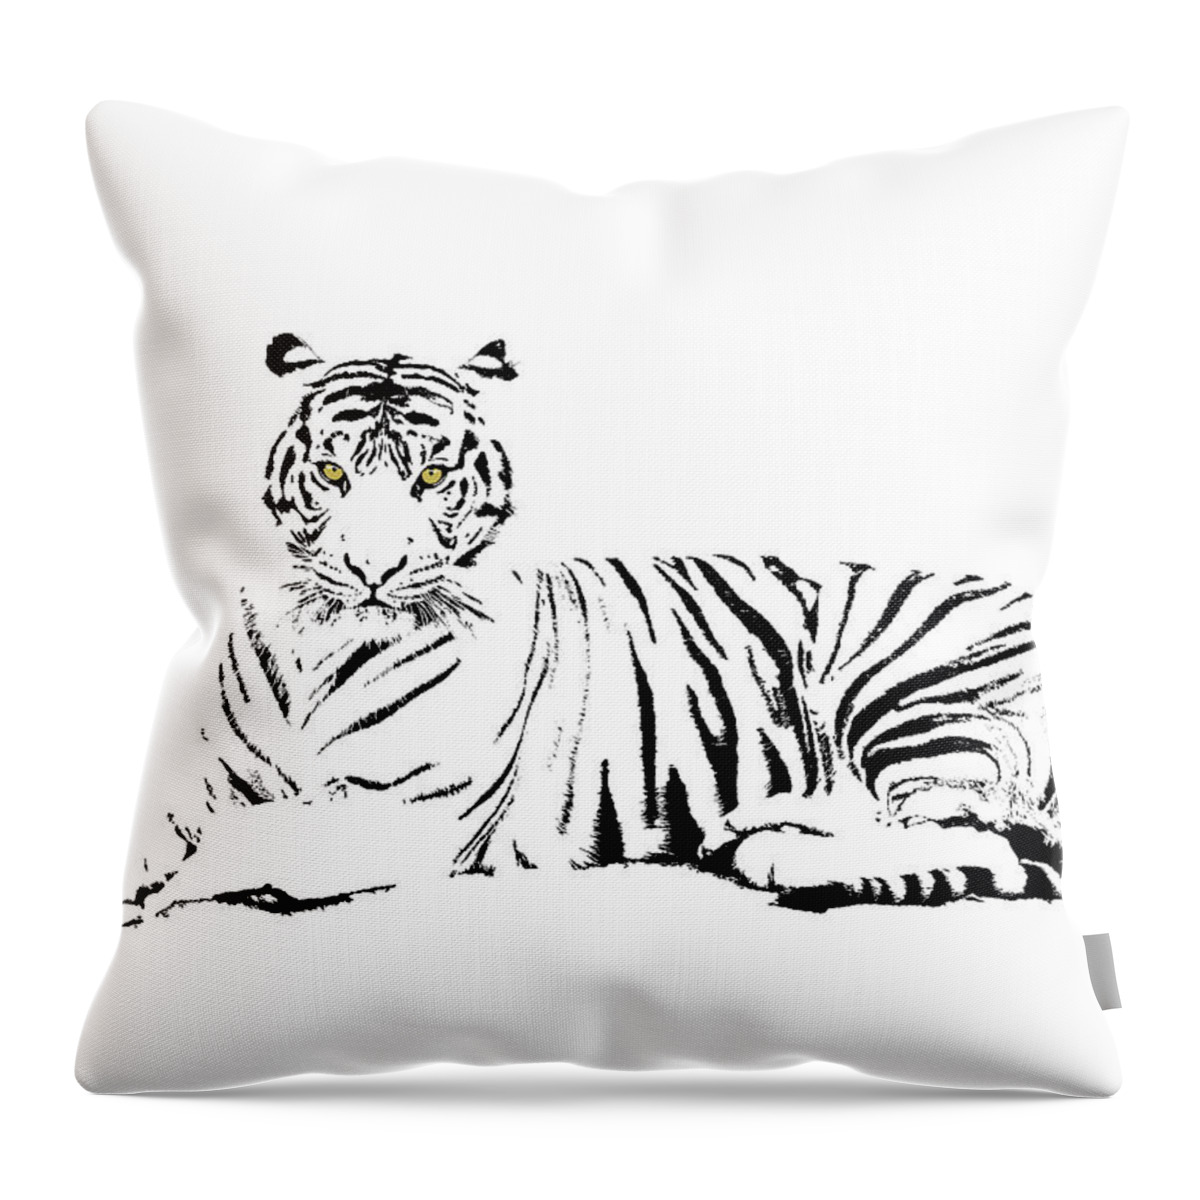 Terence The Tiger Throw Pillow featuring the digital art Music Notes 25 by David Bridburg